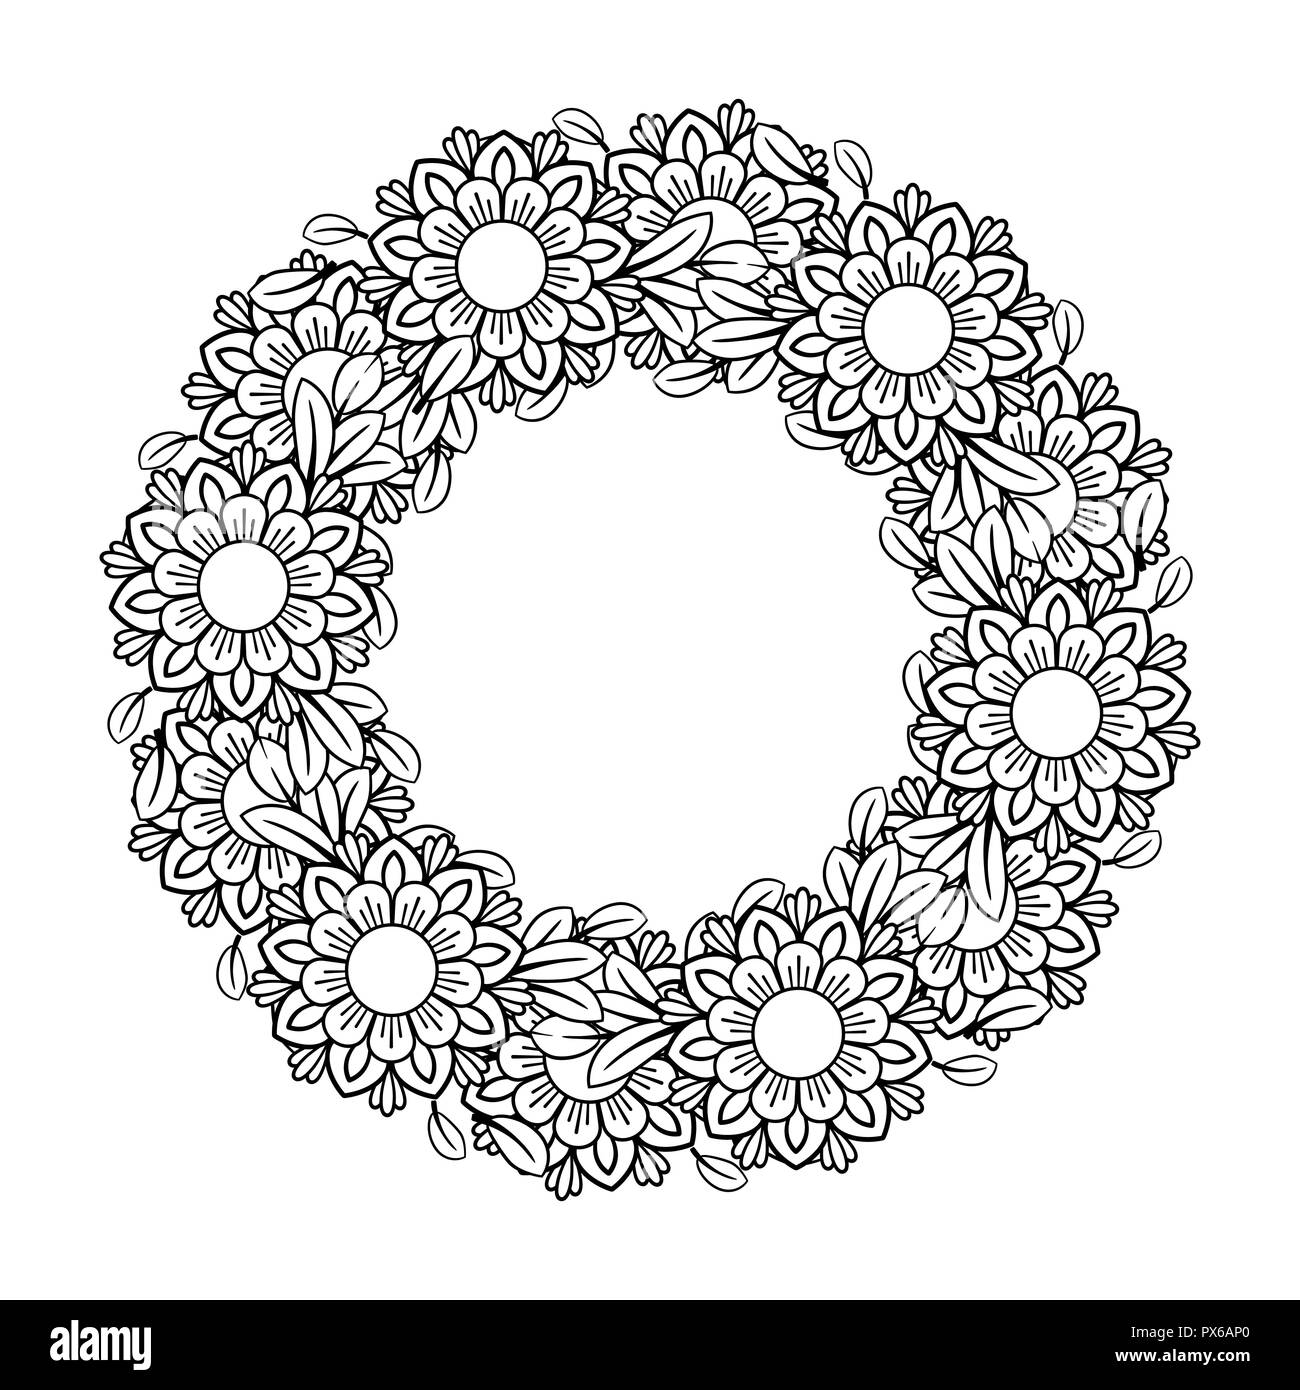 Adult coloring page with flowers pattern. Black and white doodle wreath. Floral mandala. Bouquet line art vector illustration isolated on white background. Round design element Stock Vector